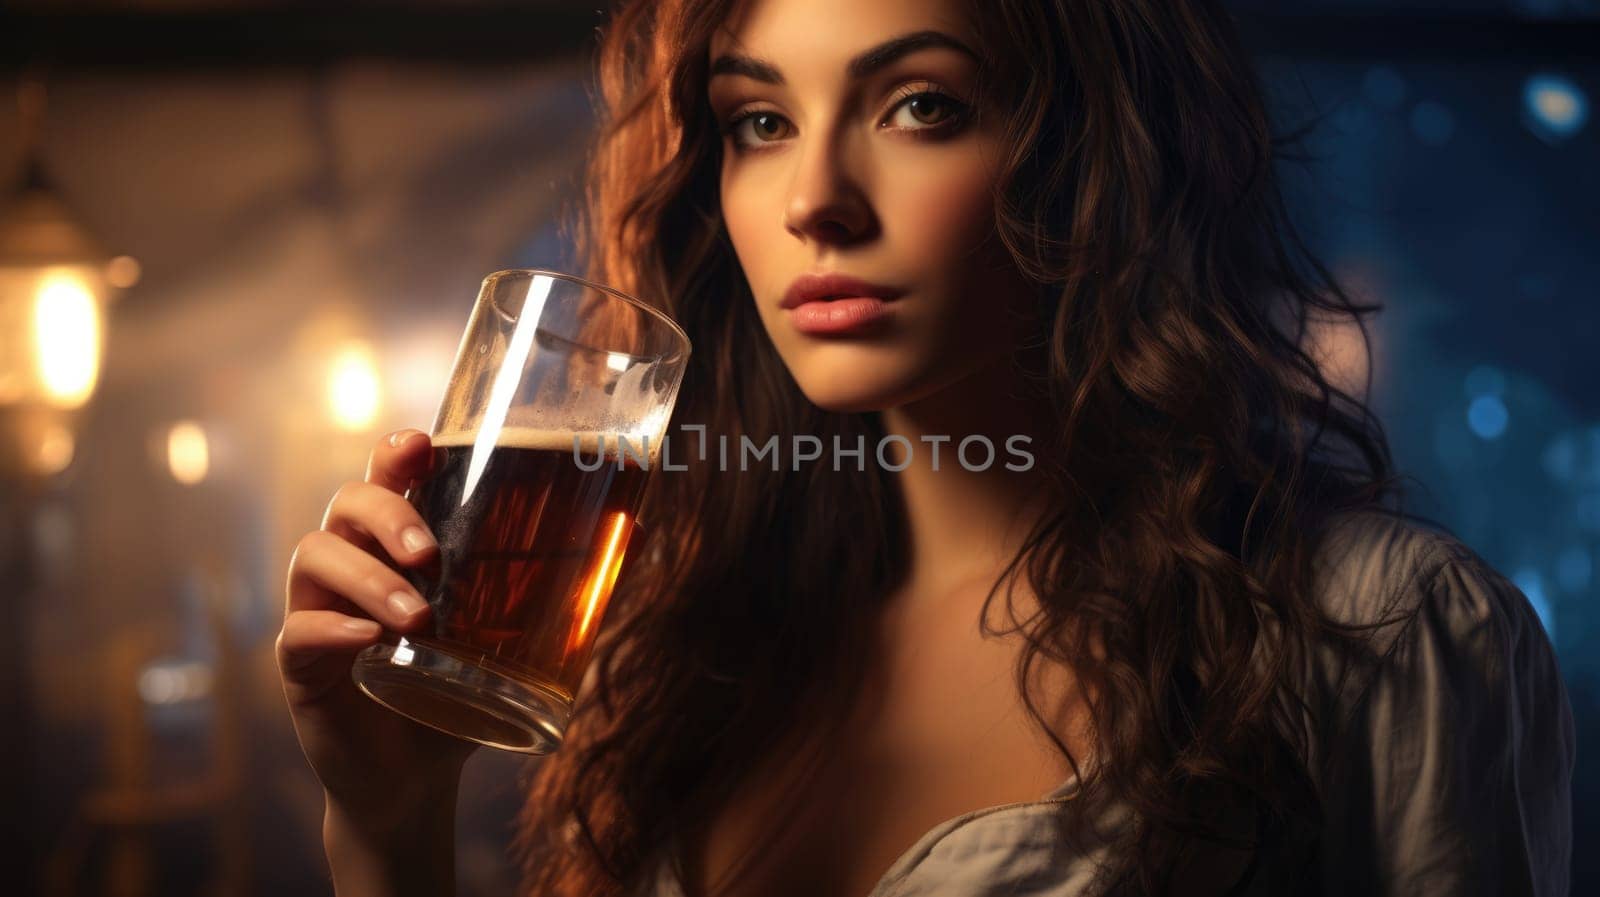 Beautiful brunette woman enjoying glass of beer at the cozy bar celebrating St Patricks Day by JuliaDorian